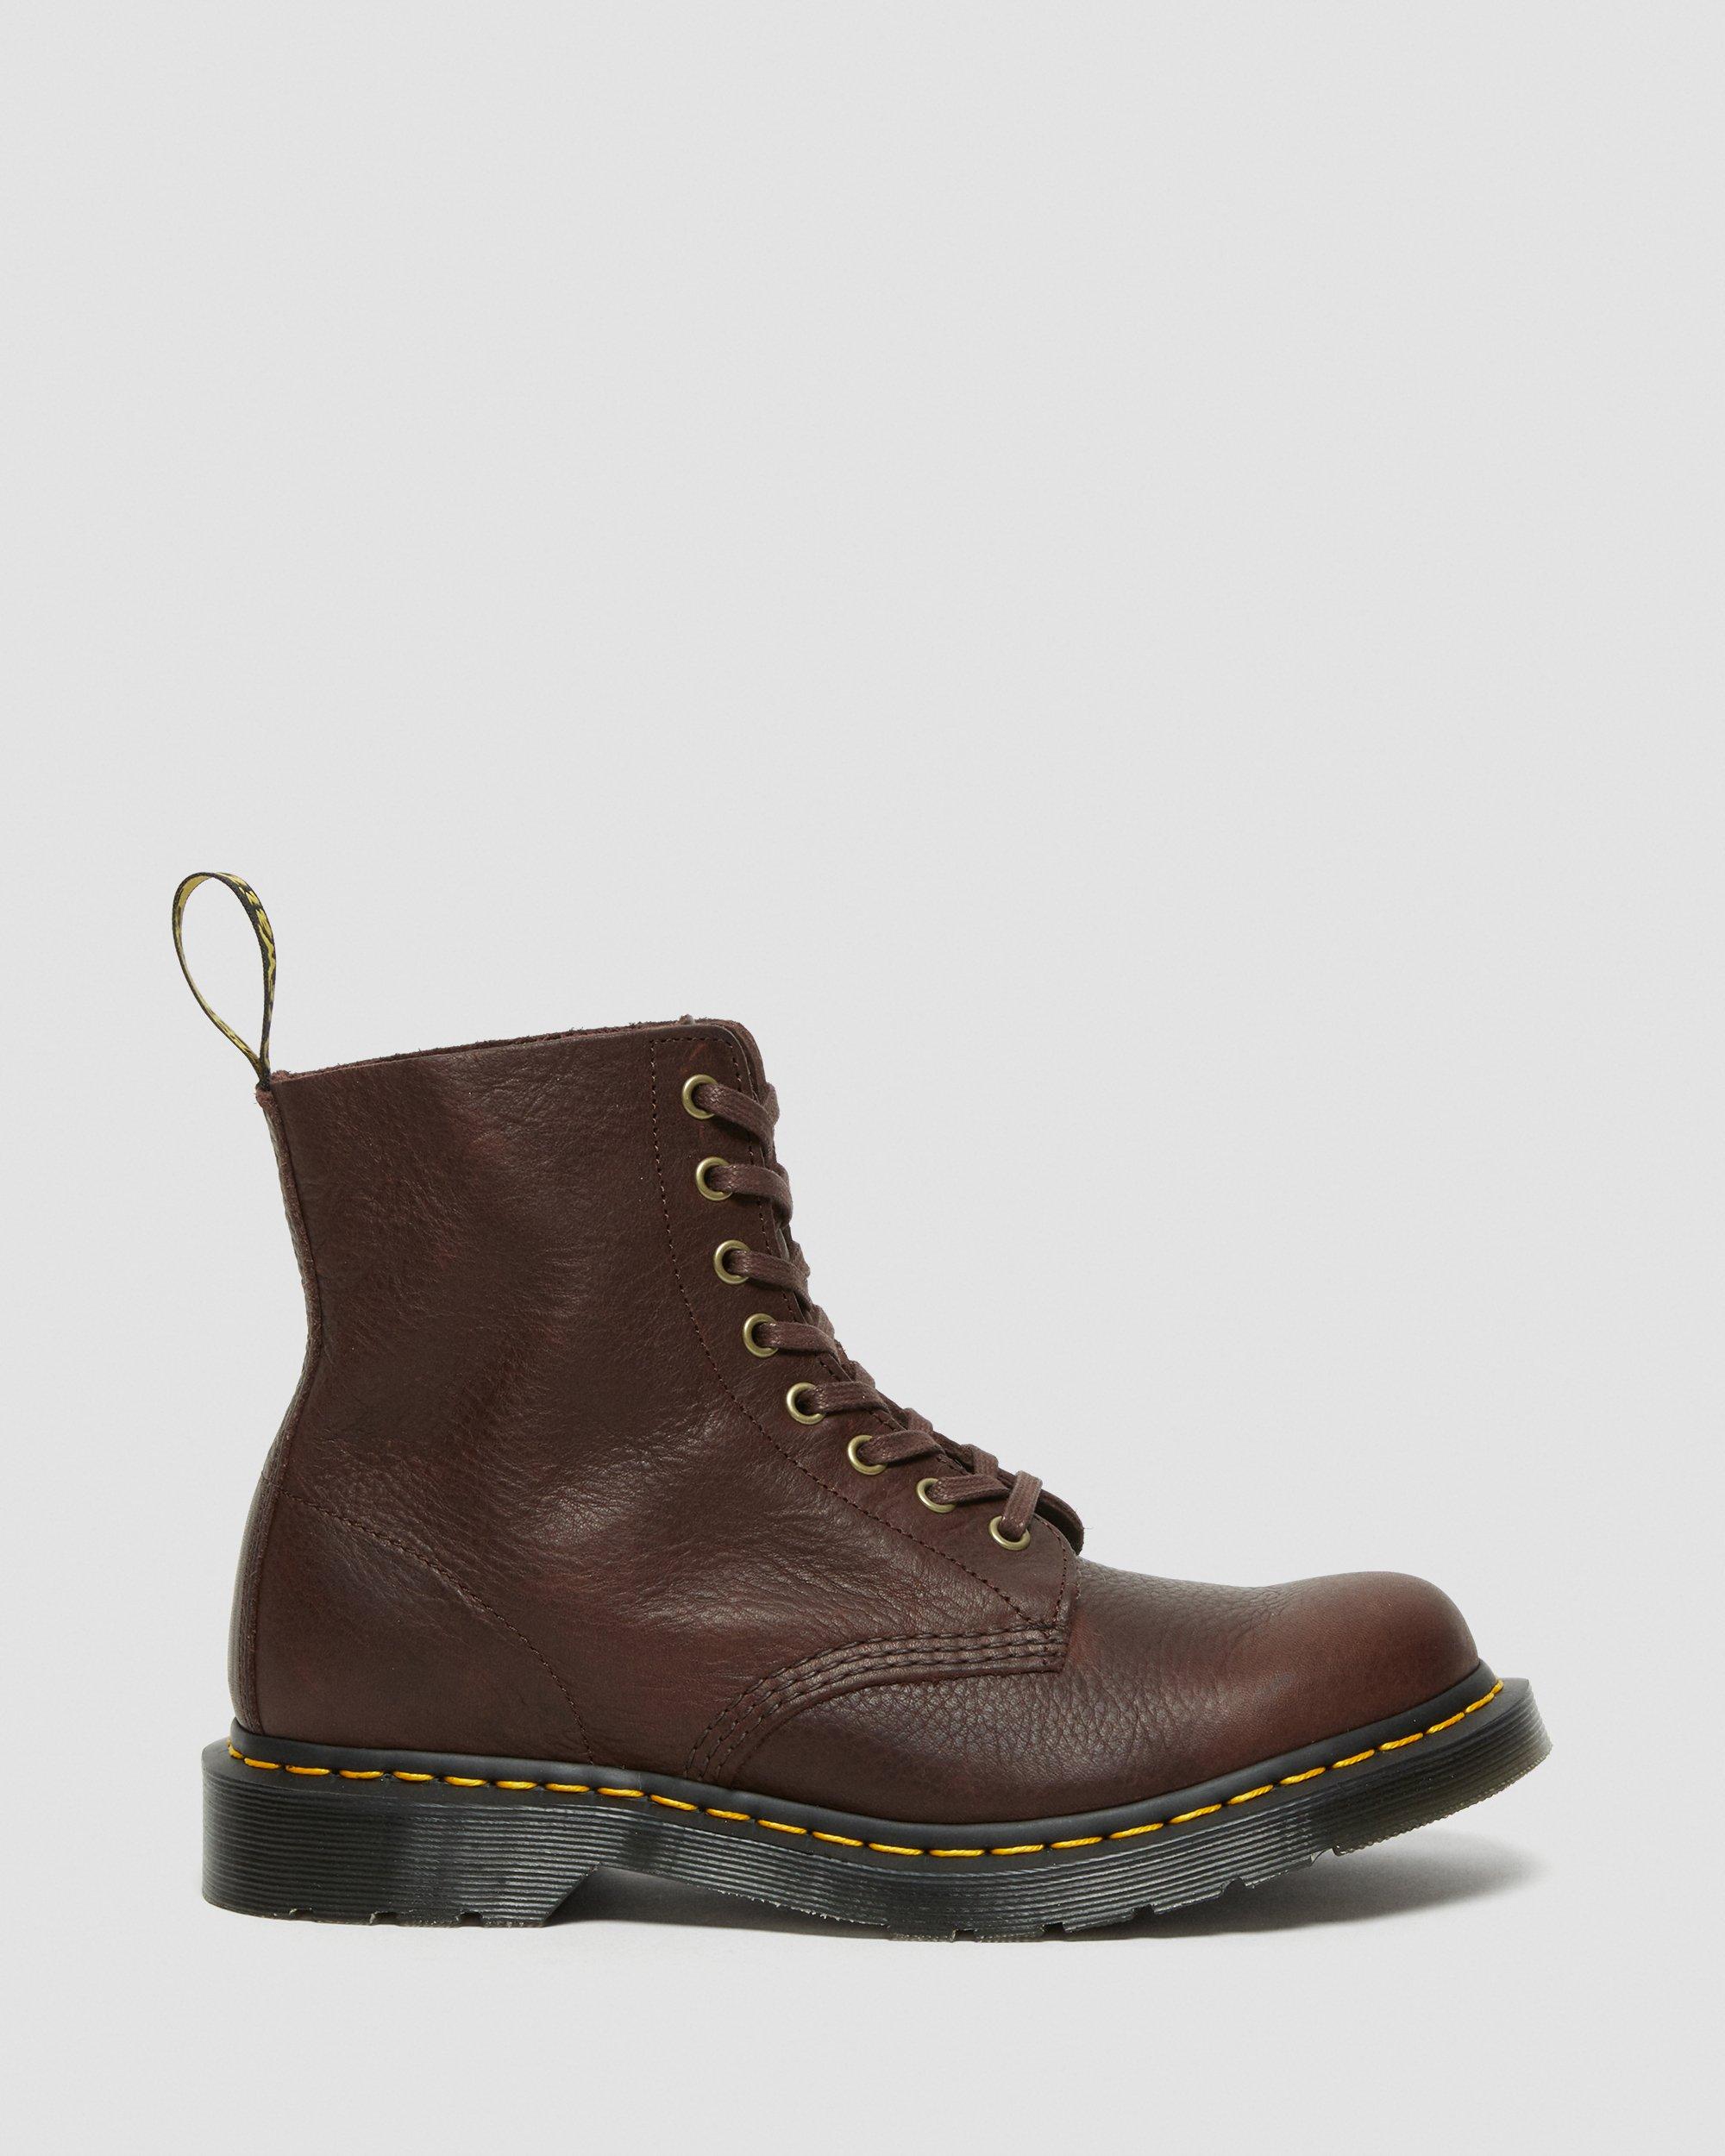 1460 Pascal Ambassador Leather Lace Up Boots in Cask | Dr. Martens